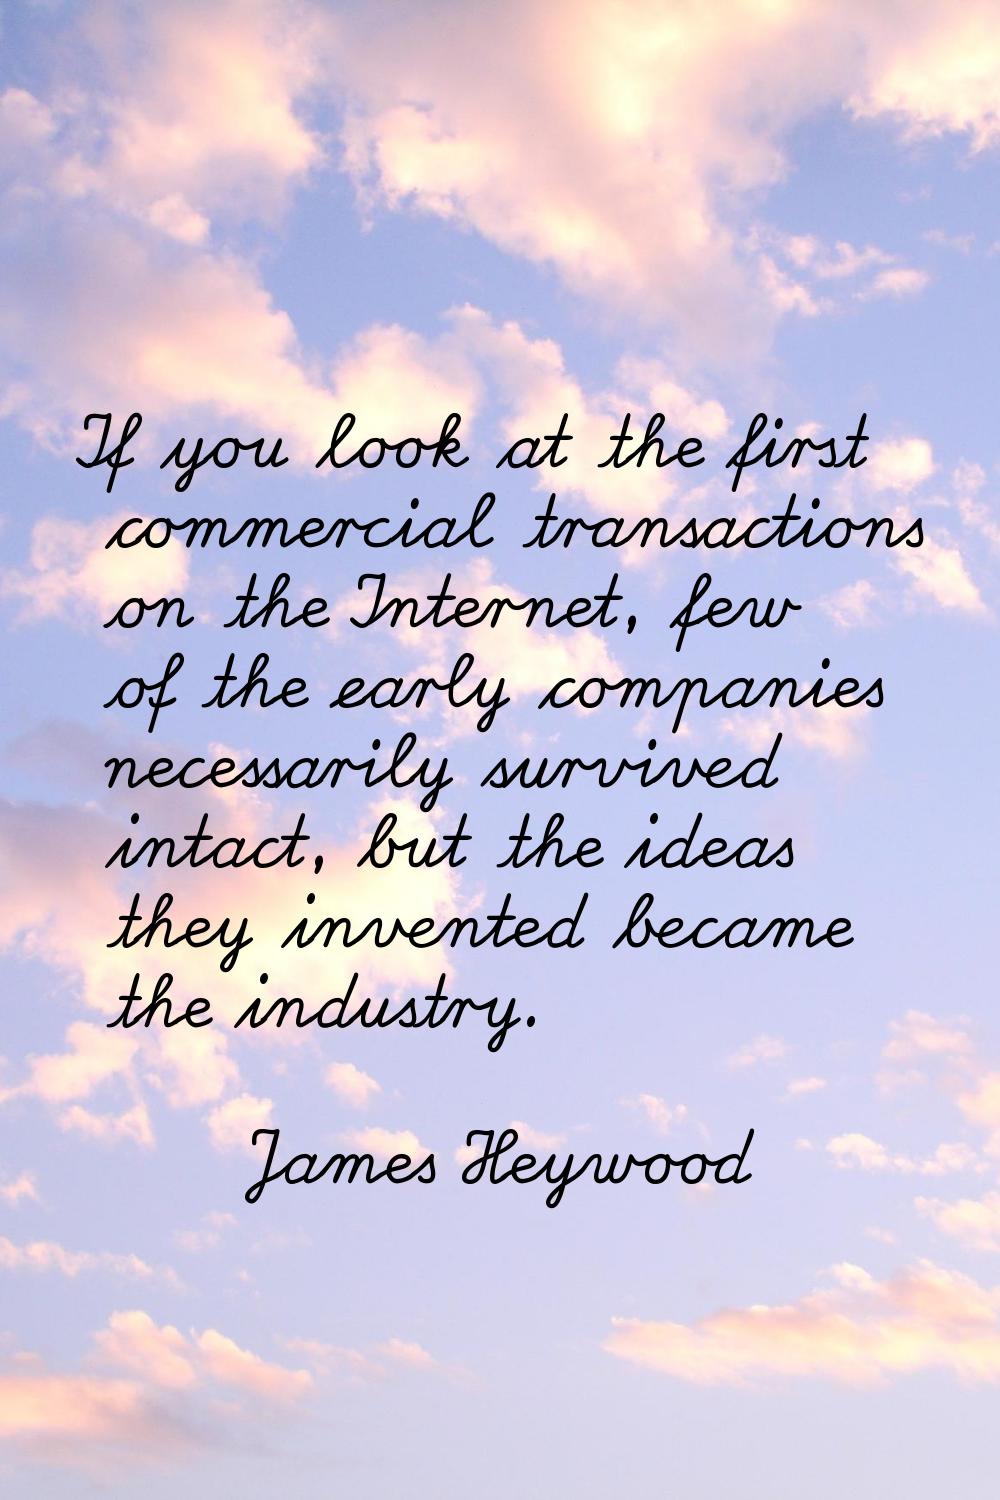 If you look at the first commercial transactions on the Internet, few of the early companies necess